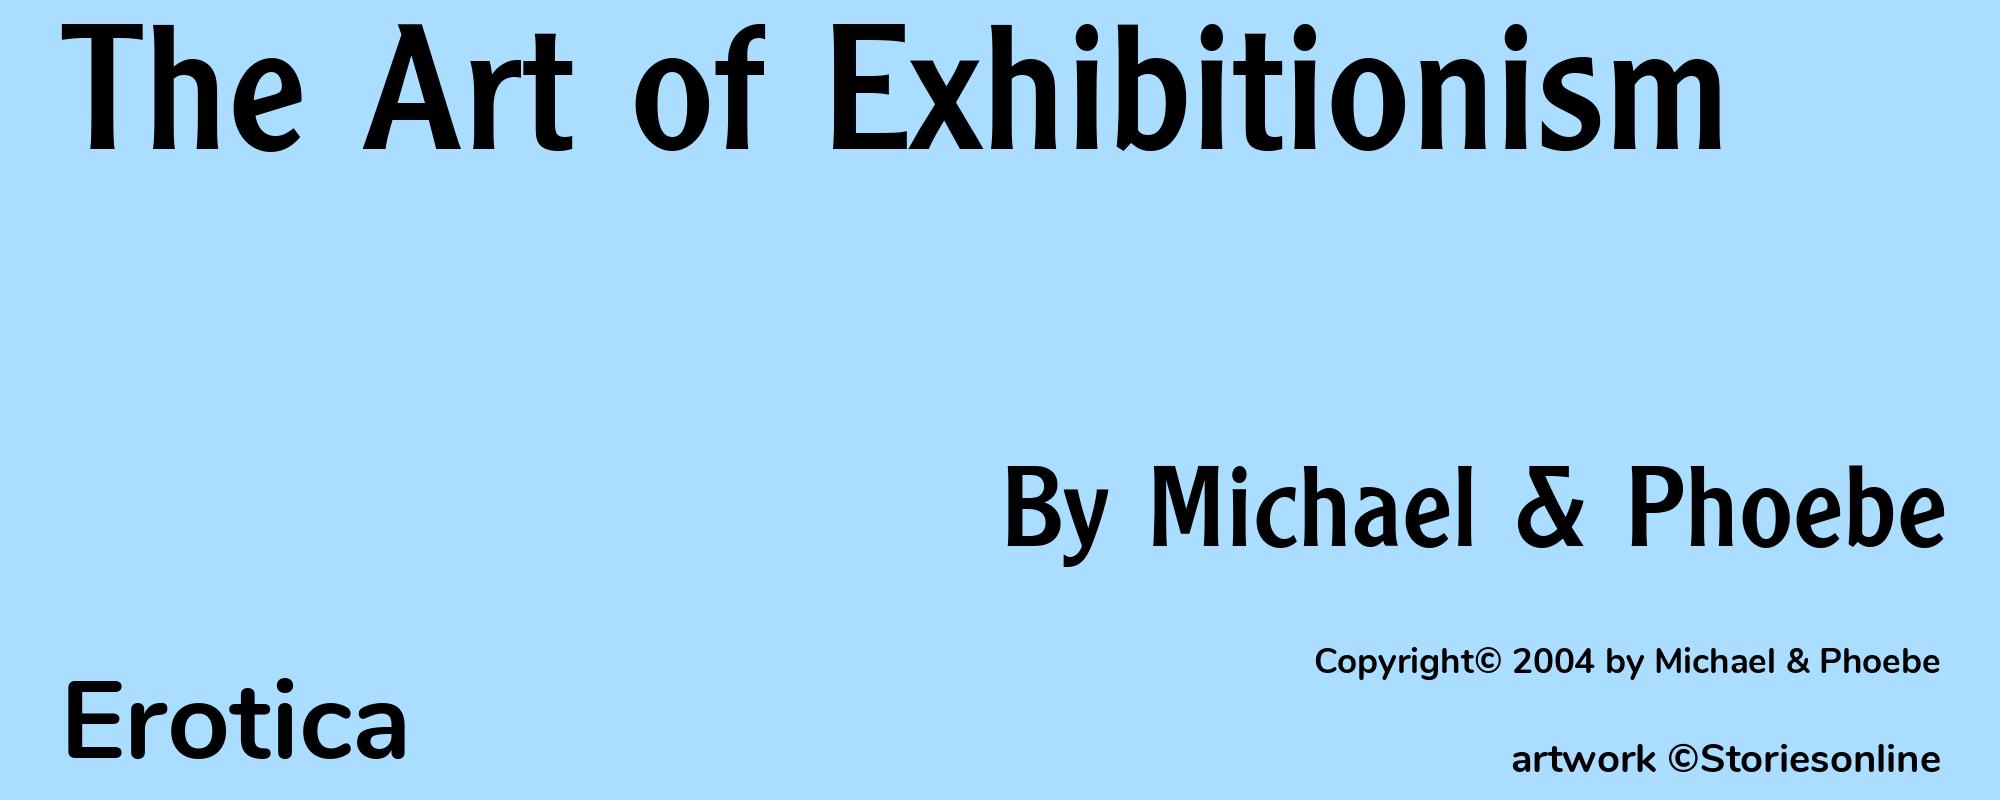 The Art of Exhibitionism - Cover